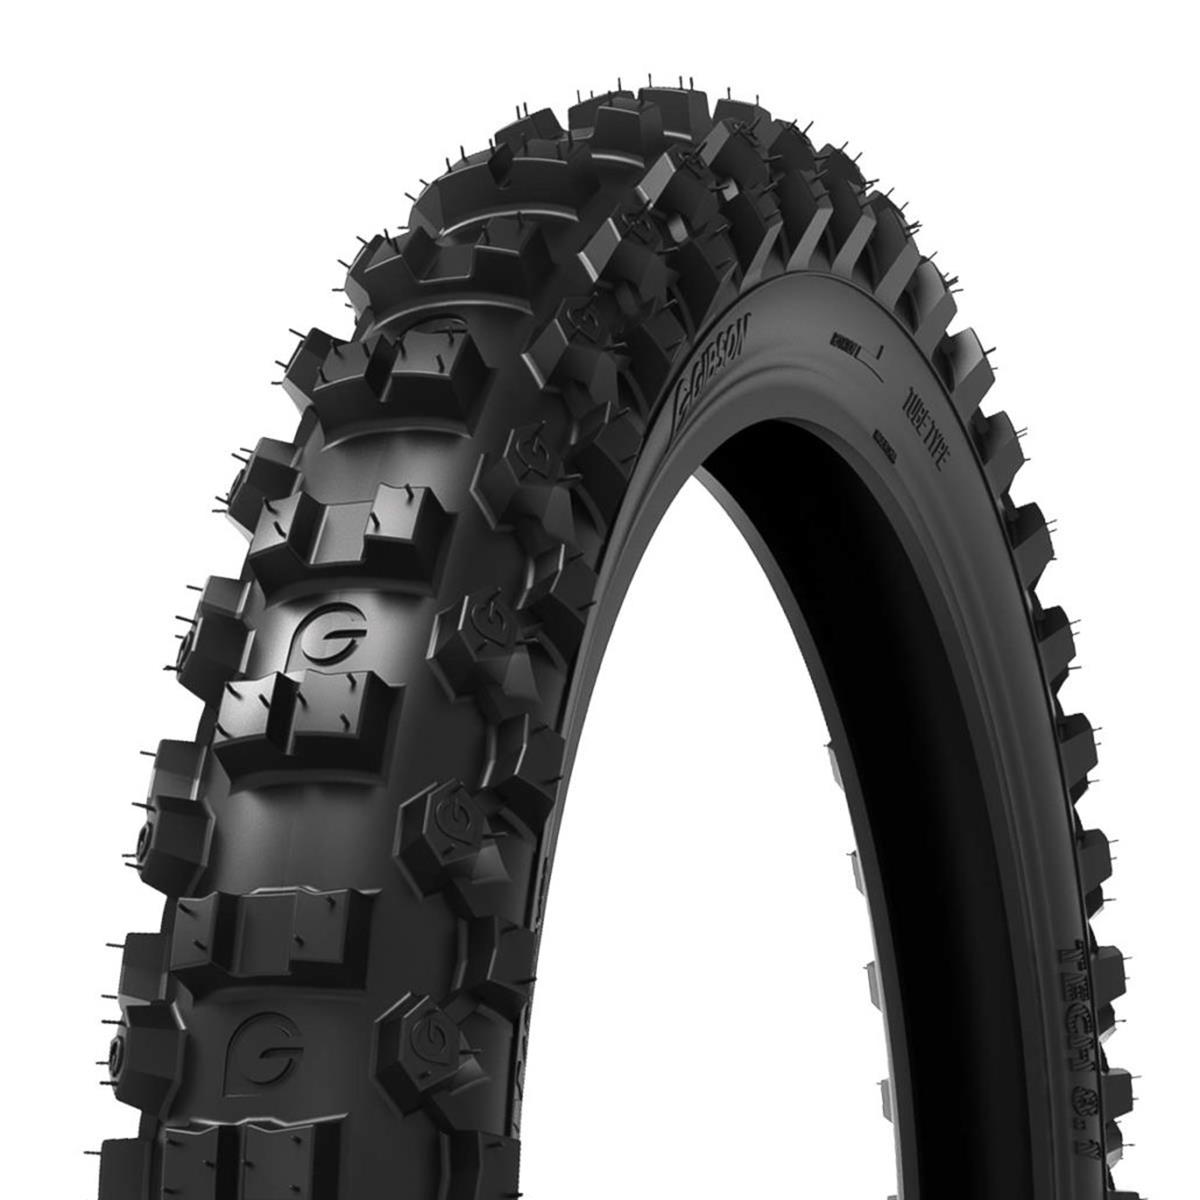 Gibson Front Tire Tech 9.1 90/100-21, FIM licensed